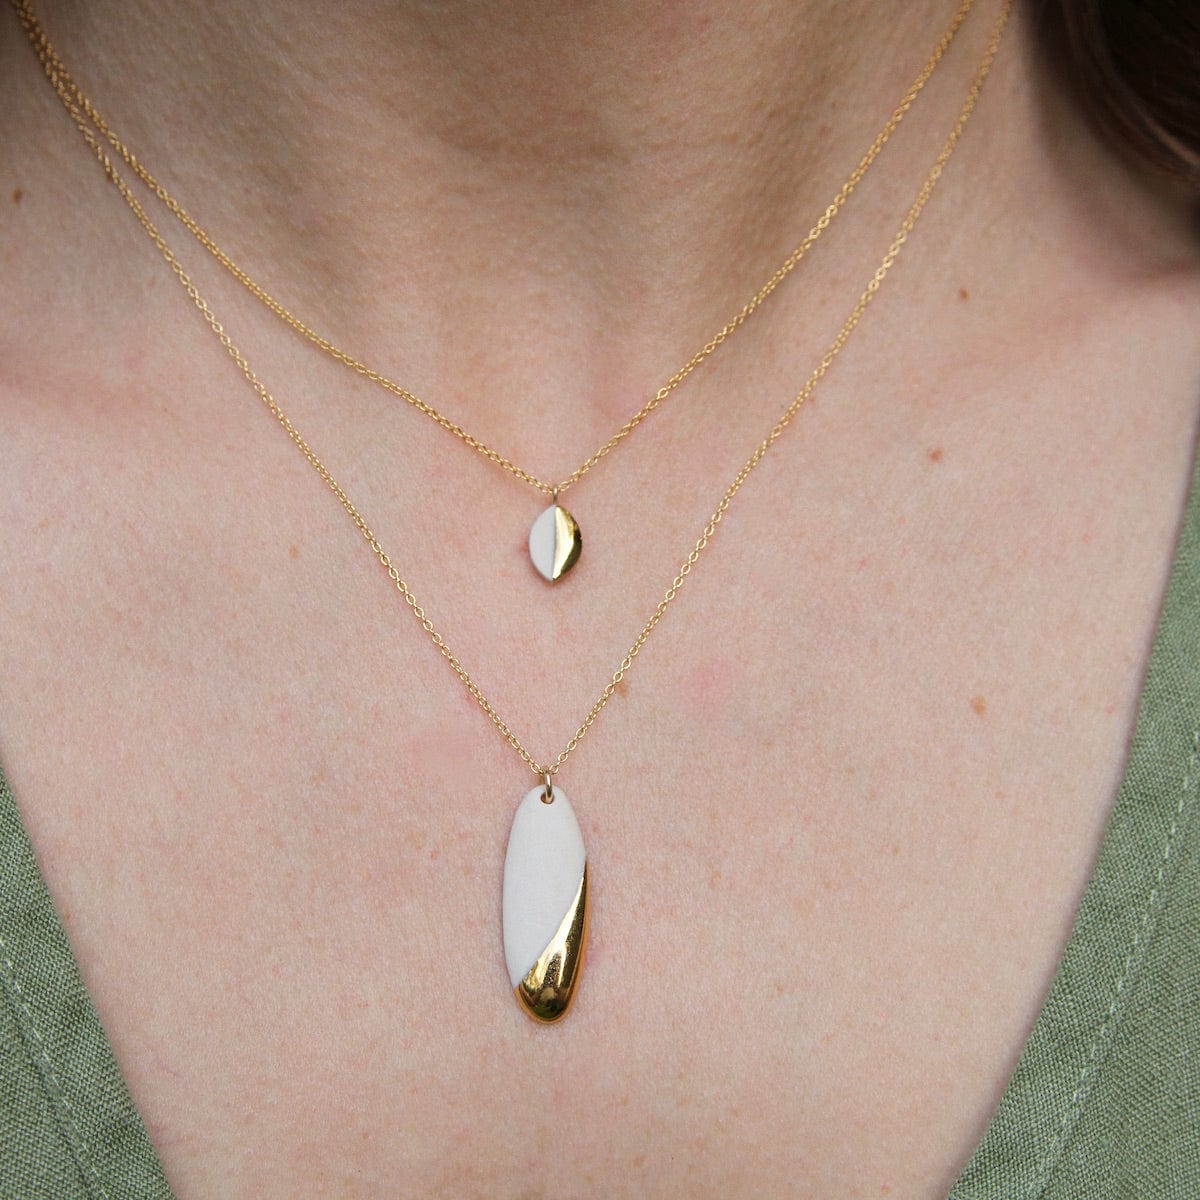 NKL-GF Gold Dipped Long Oval Necklace - White